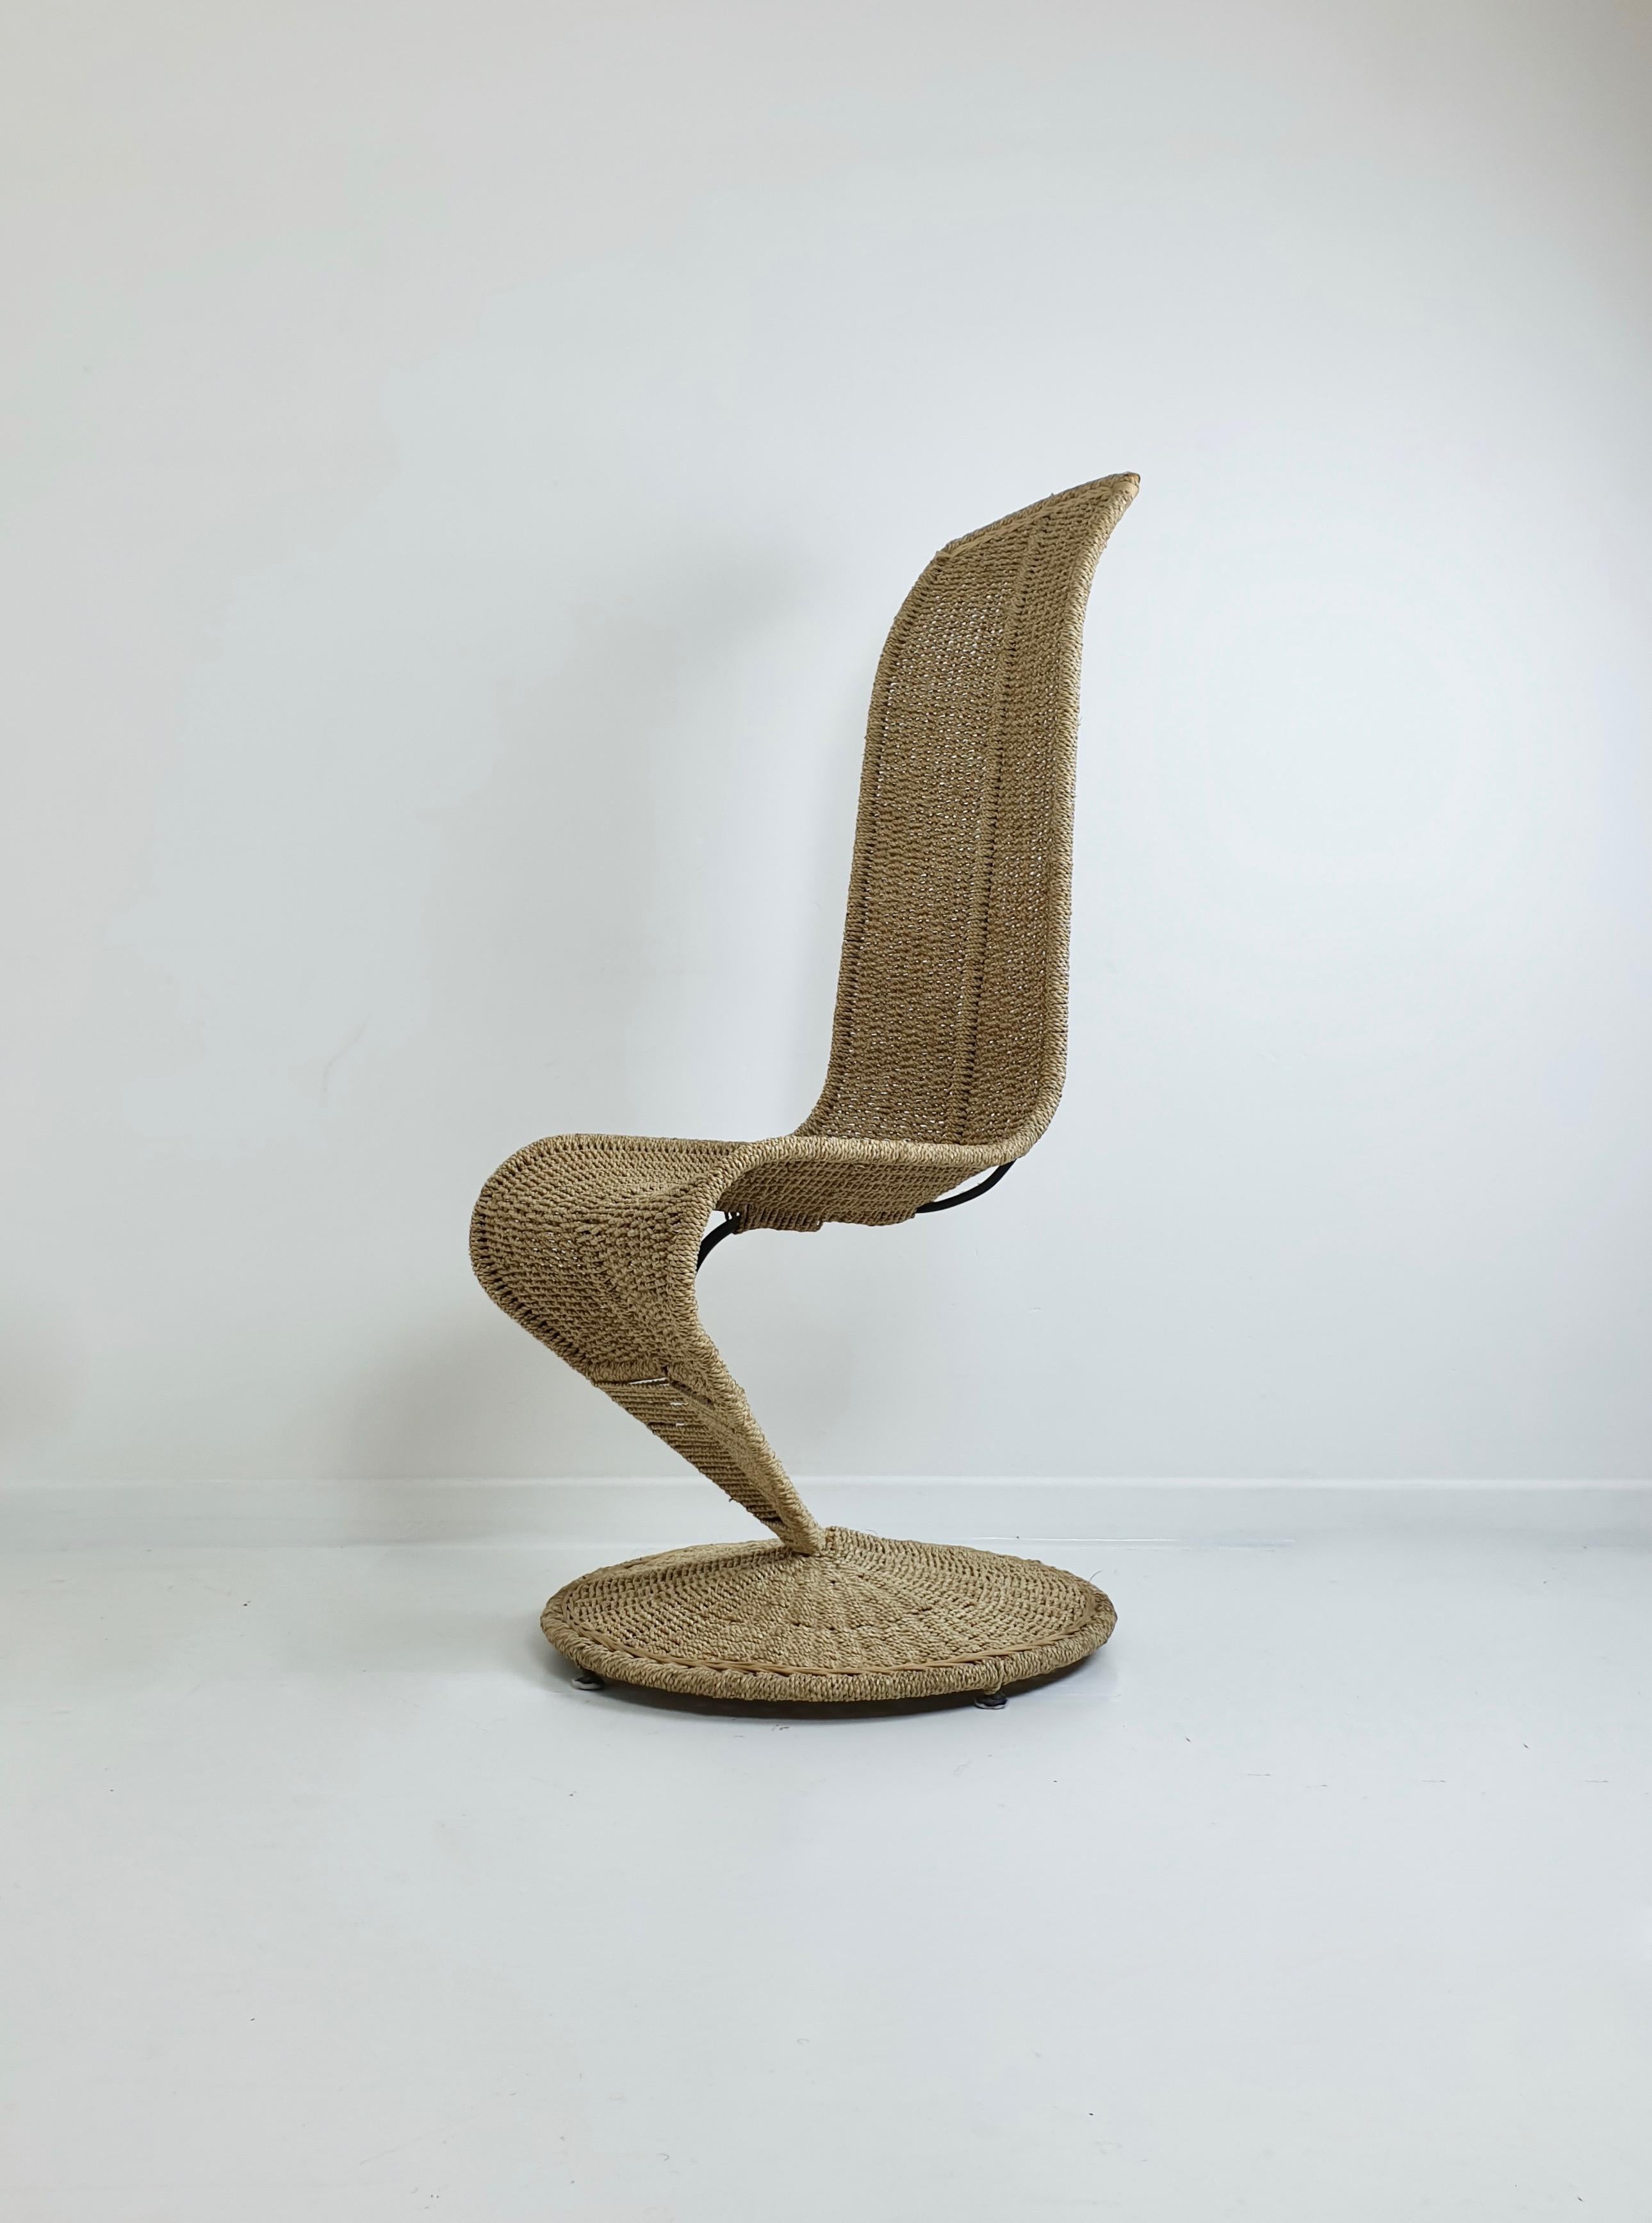 Mid-Century Modern 'S' chair designed by Marzo Cecchi in the 1970s. Formed from handwoven rope on a metal frame.